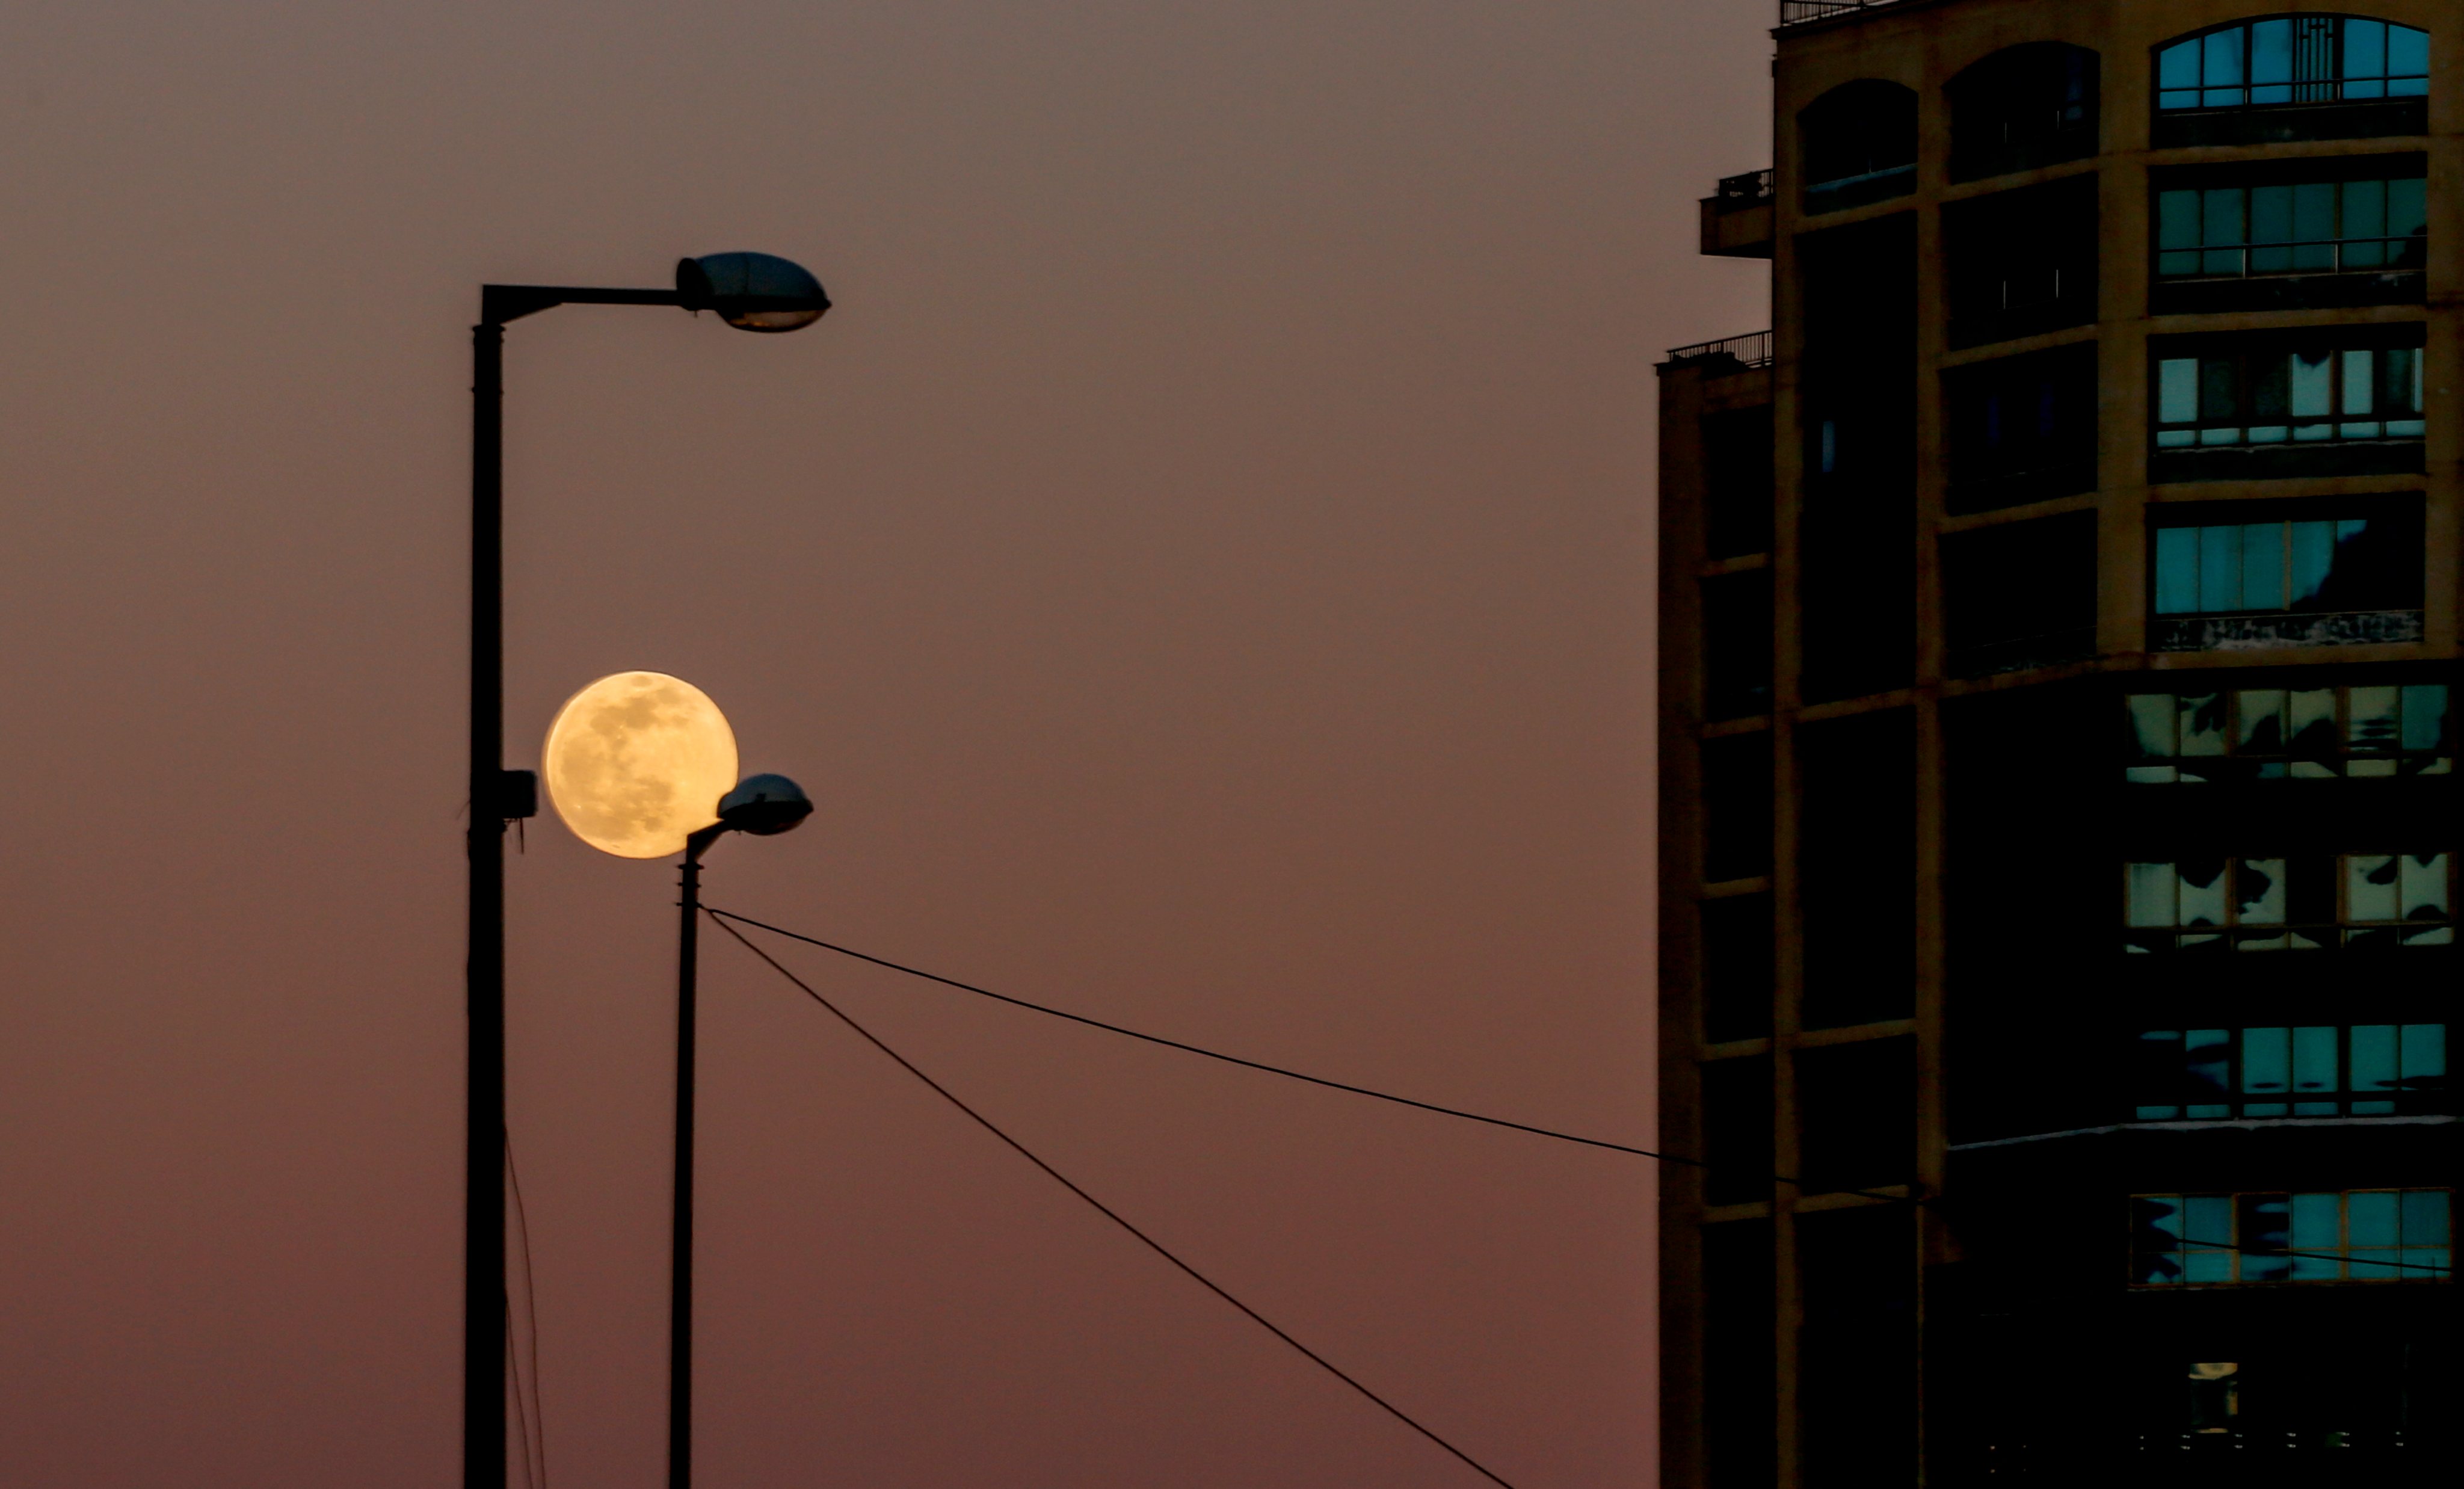 The Full Wolf Moon Rises Over Gaza City